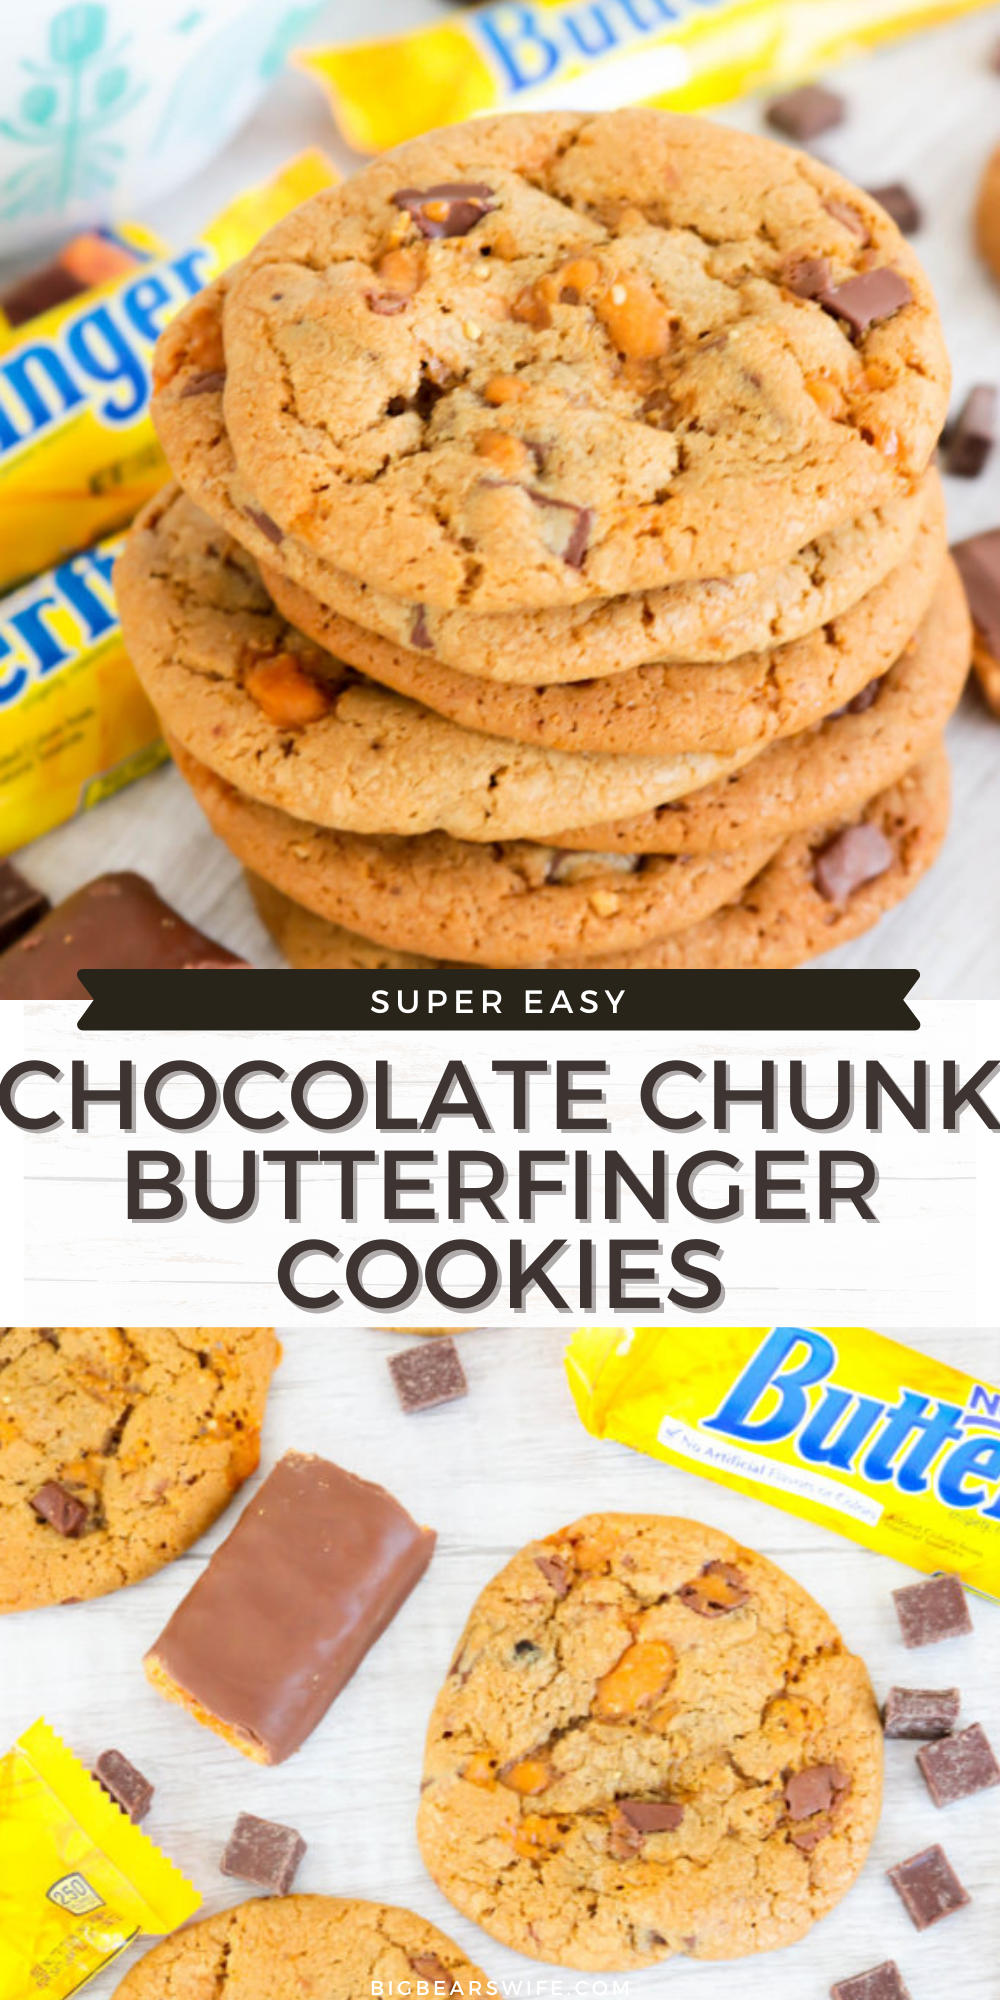 These Chocolate Chunk Butterfinger Cookies are soft and chewy cookies packed with chocolate chunks and chopped Butterfinger Candy Bars. One bite of these and you’ll feel like a kid in a candy store!! via @bigbearswife